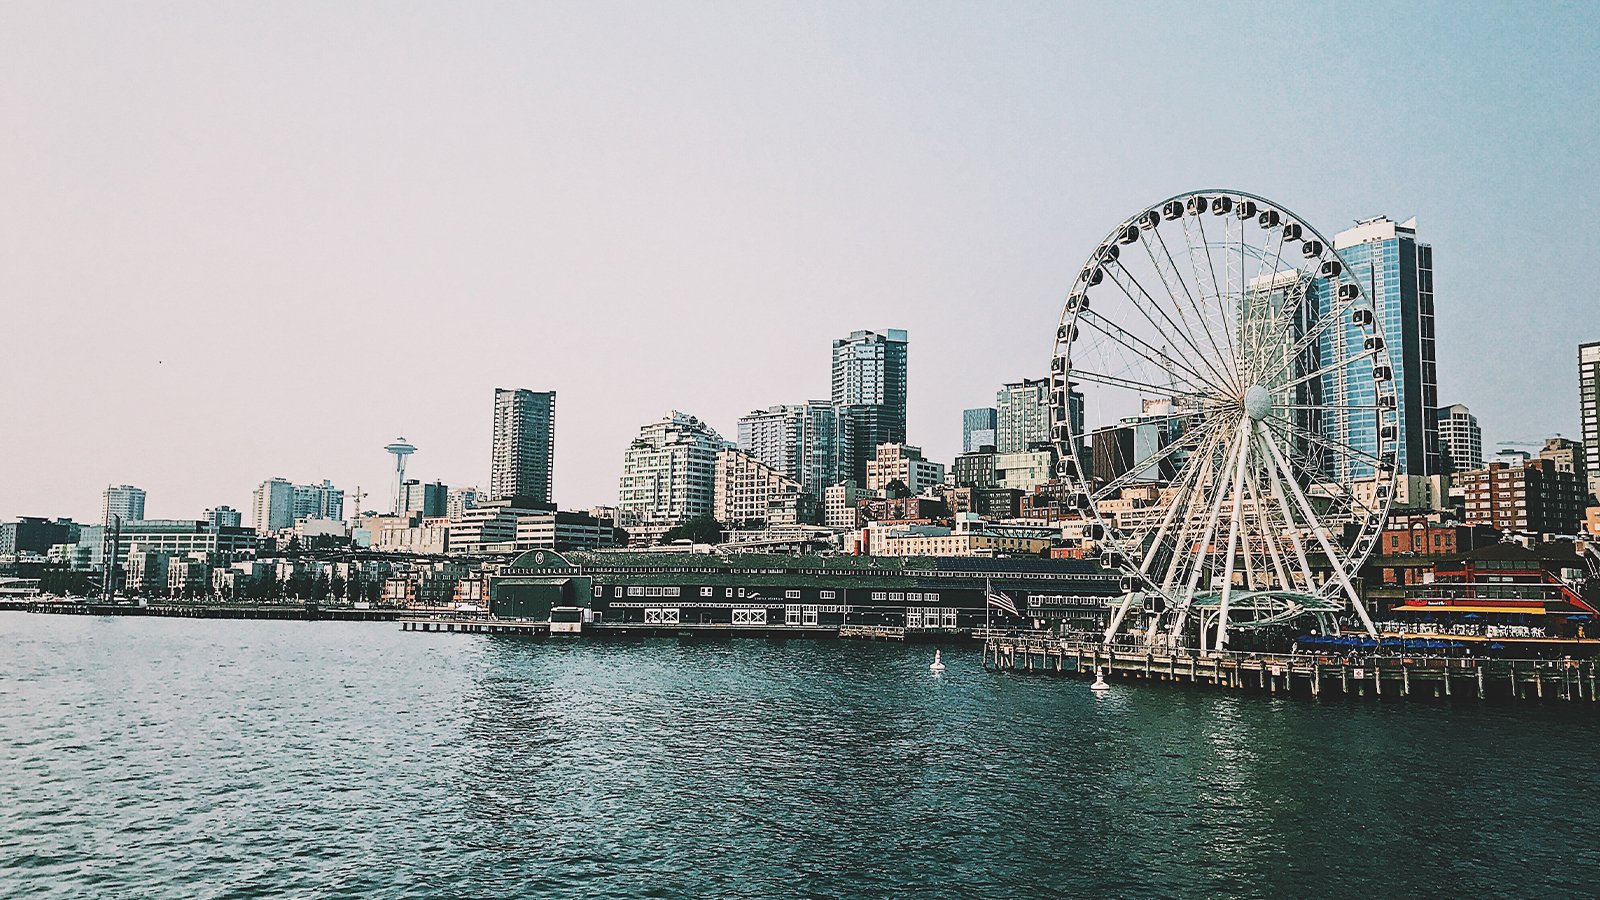 A few of the Seattle skyline from the Puget Sound with The Seattle Great Wheel on the right.